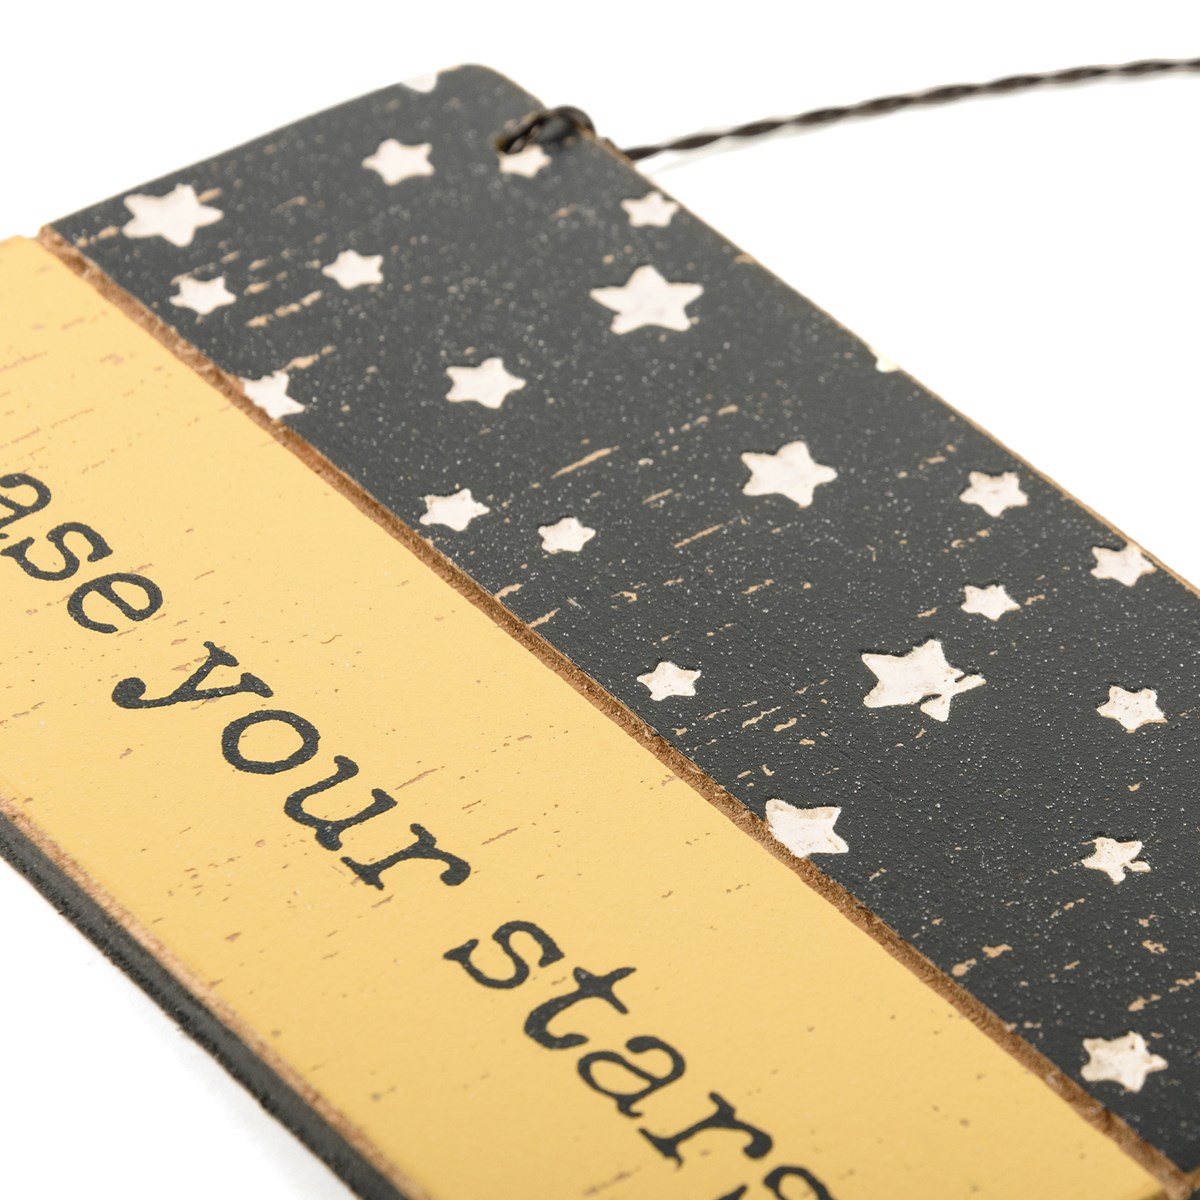 Ornament - Chase Your Stars - 5" x 3" x 0.25" - Wood